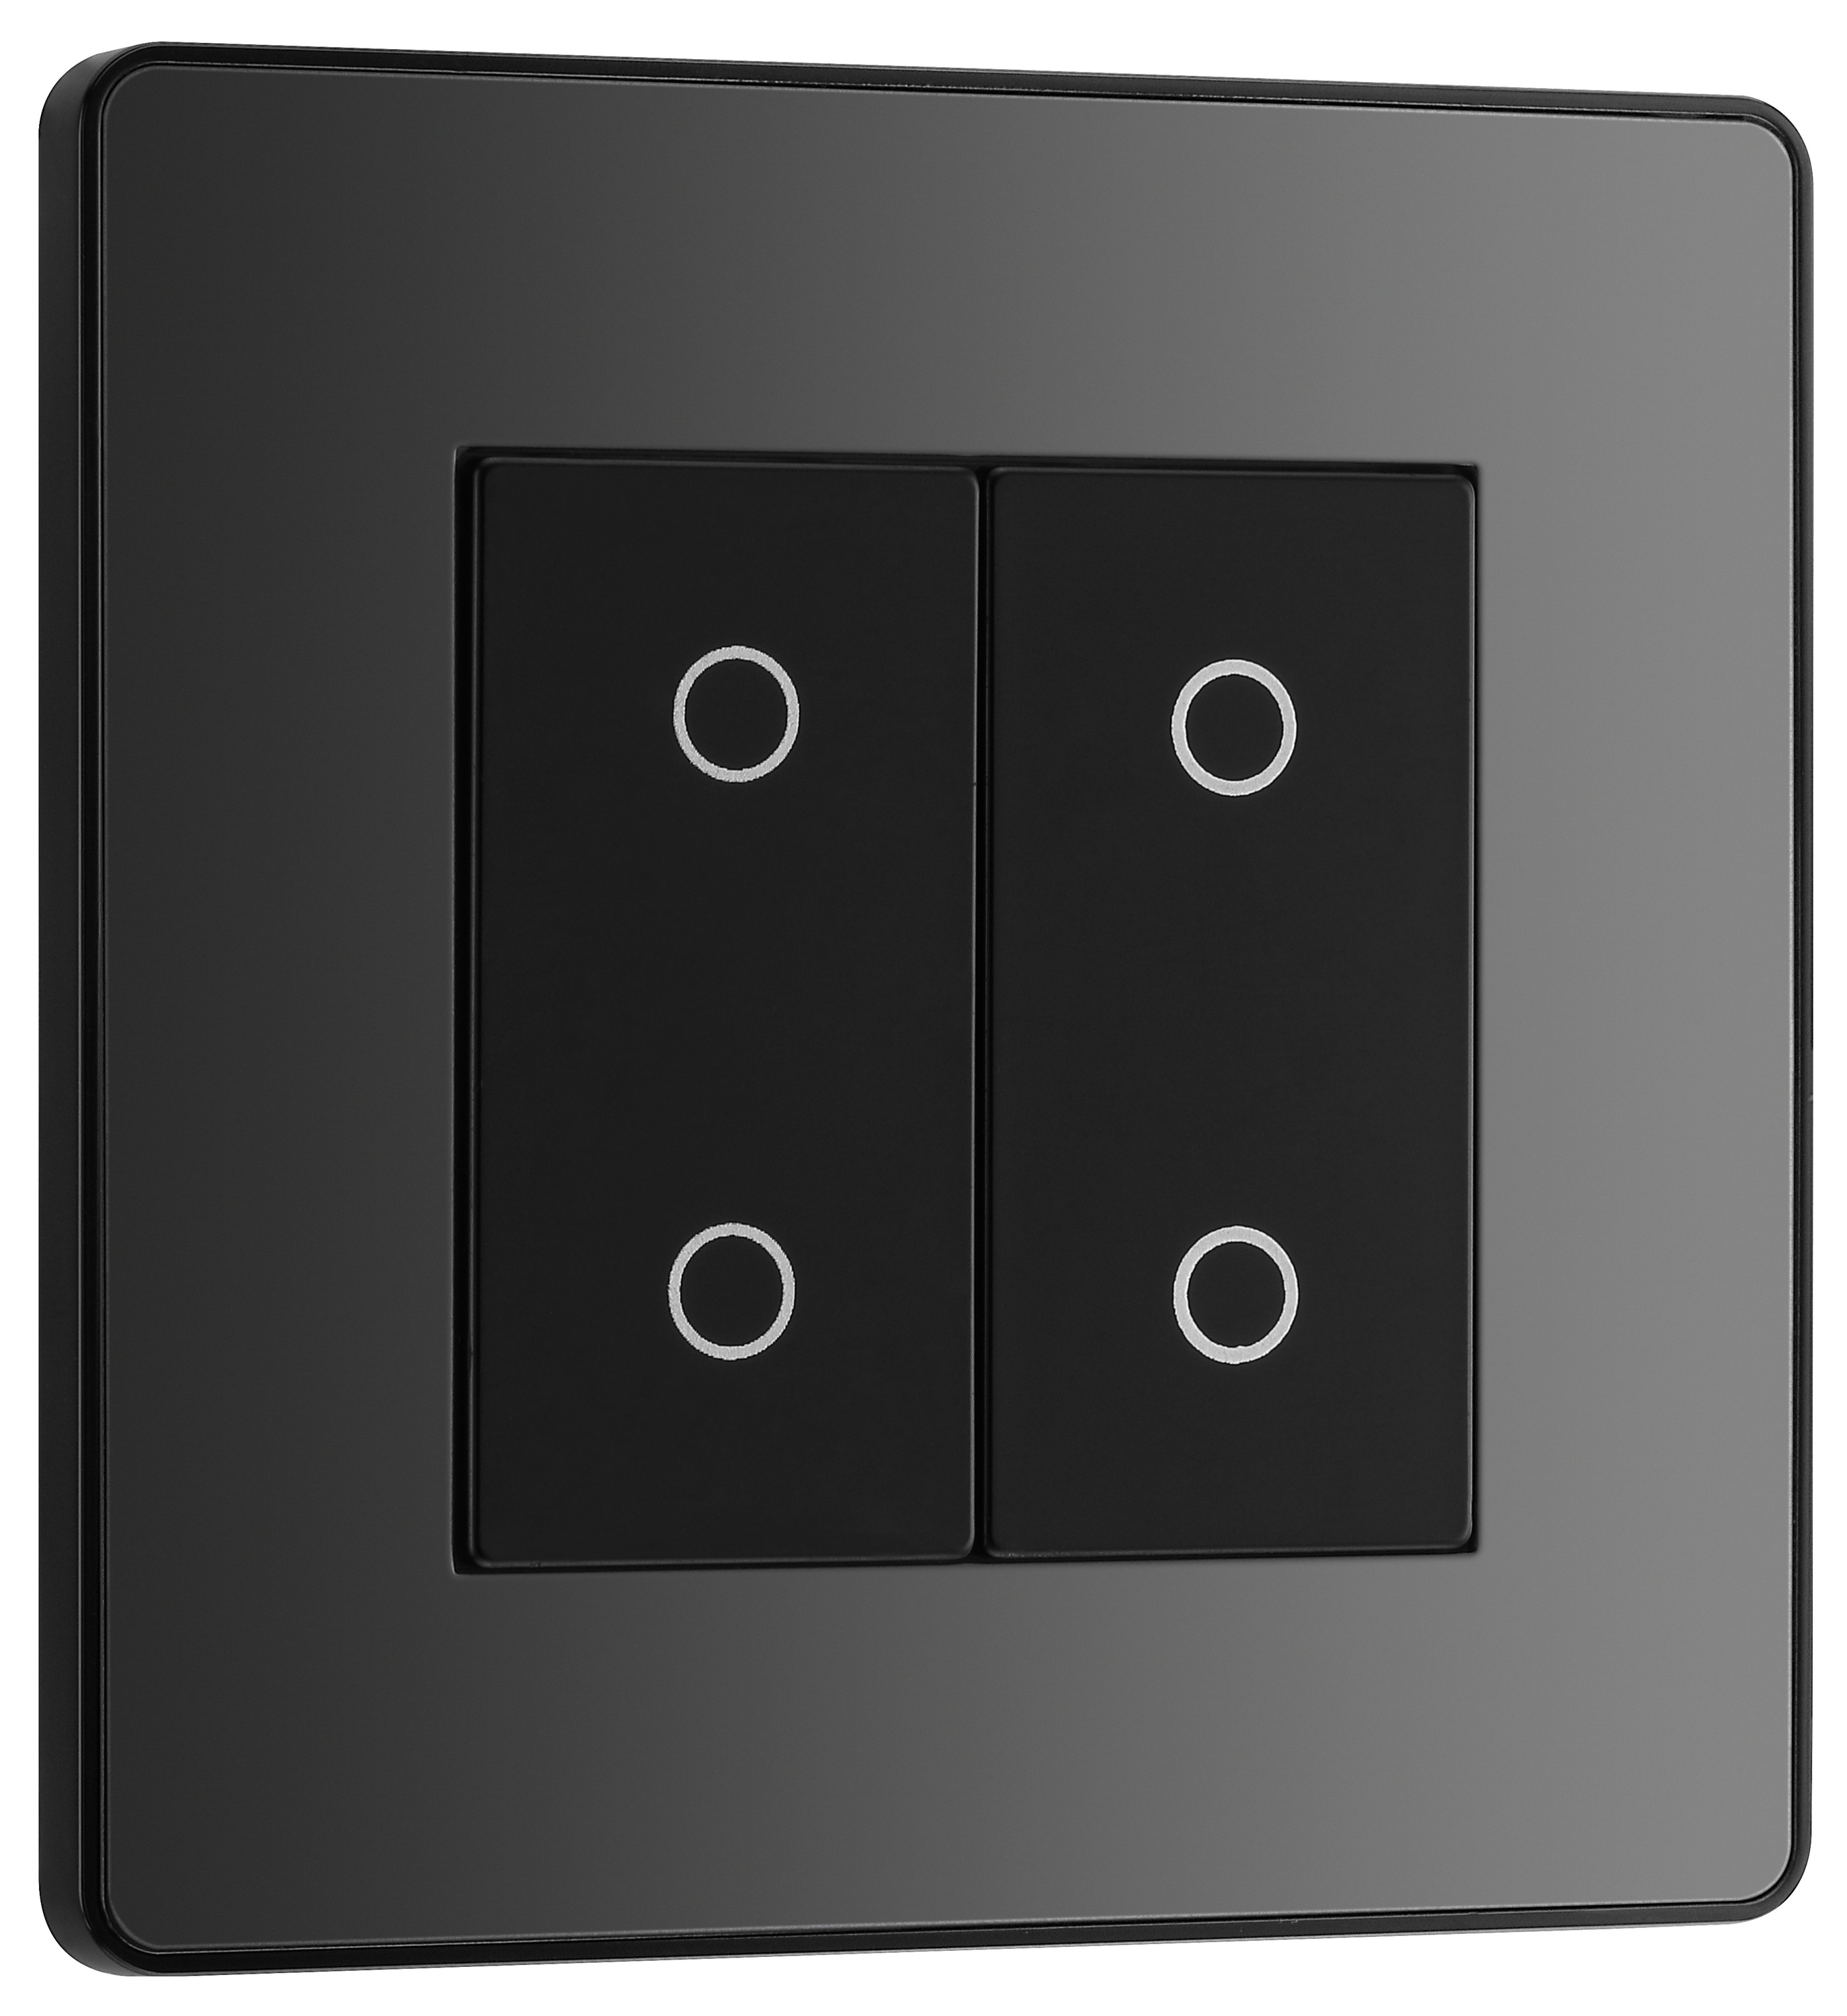 BG Evolve Secondary Black Chrome 2 Way Double Touch Dimmer Switch - 200W